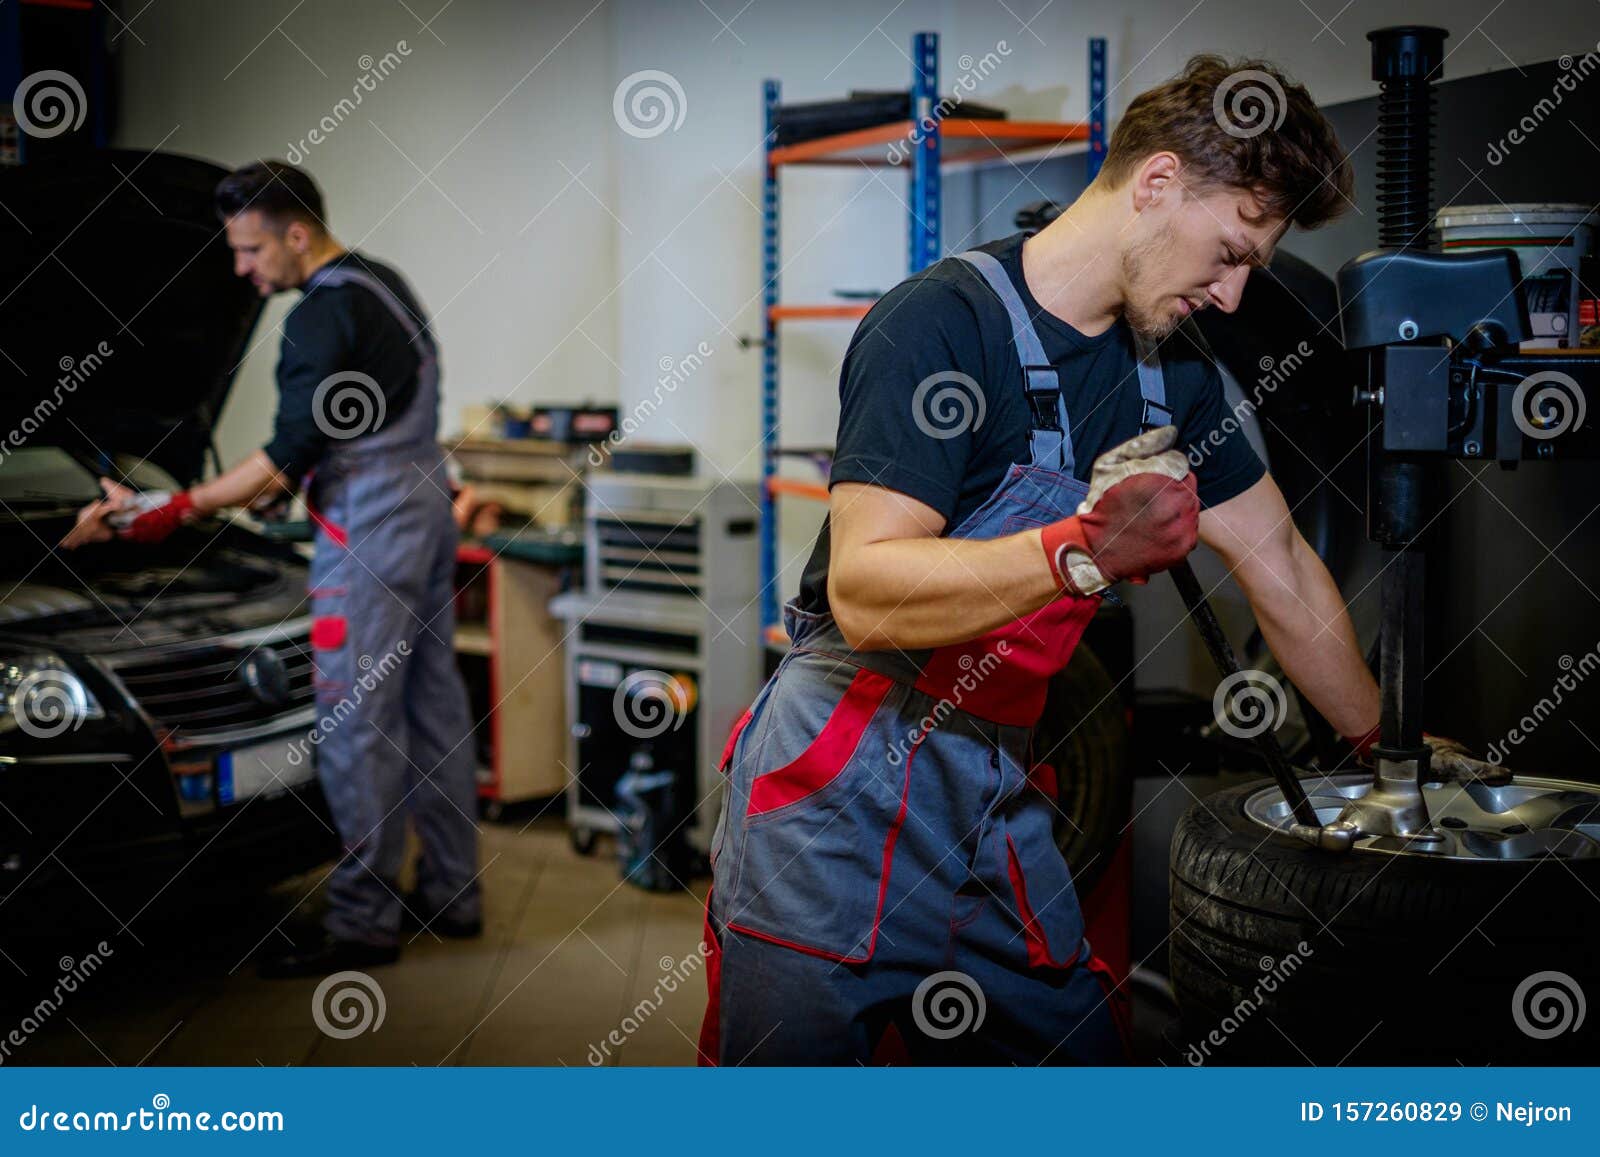 Car Mechanic Mounts Tire On Wheel In A Stock Image Image of